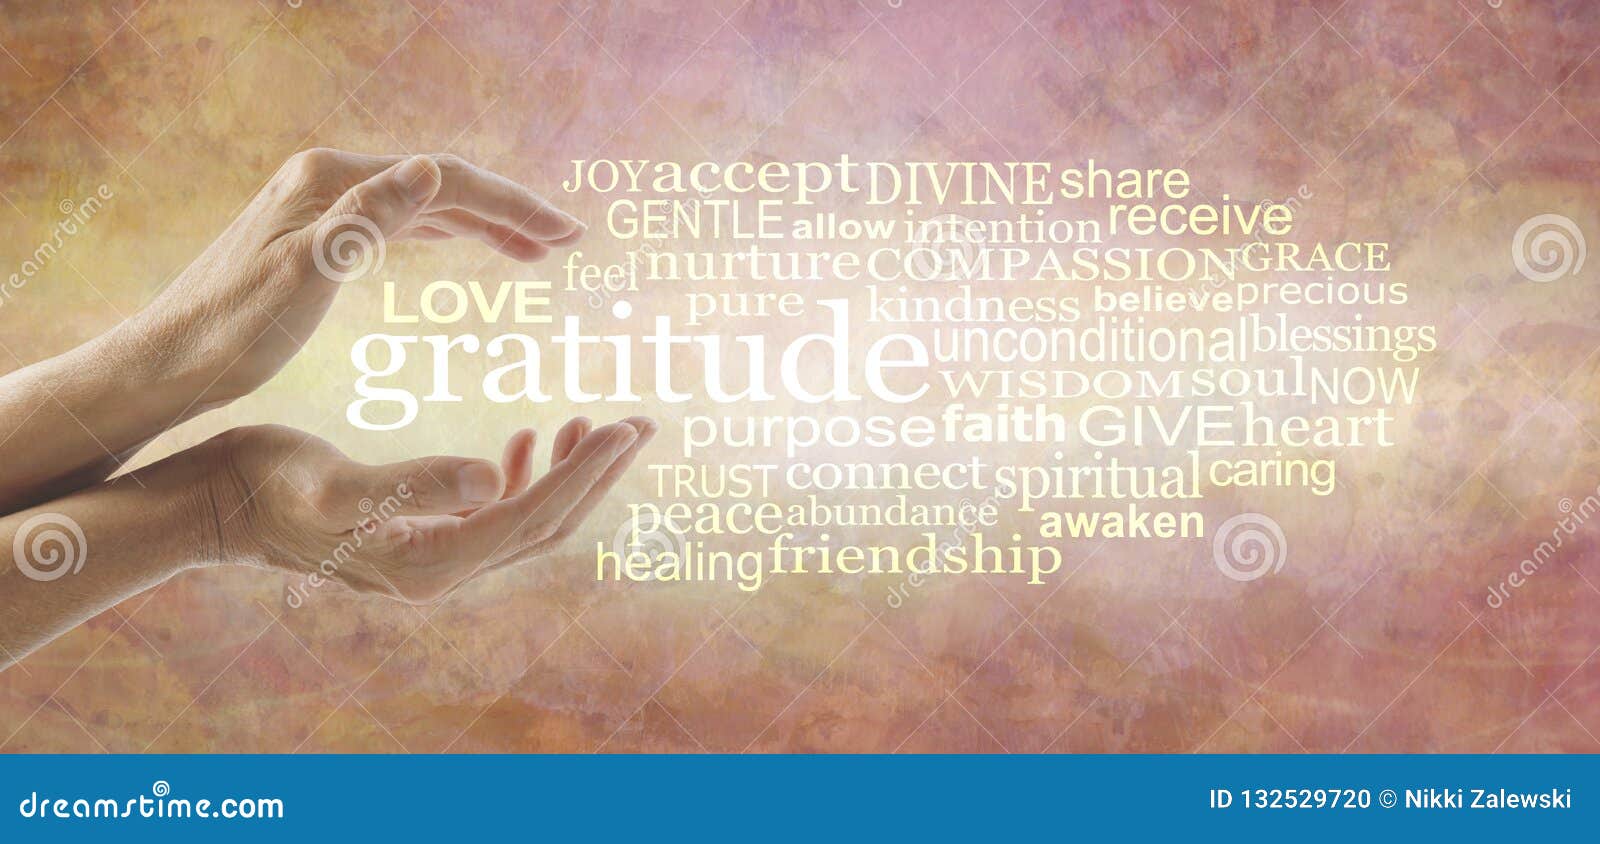 love and gratitude word cloud